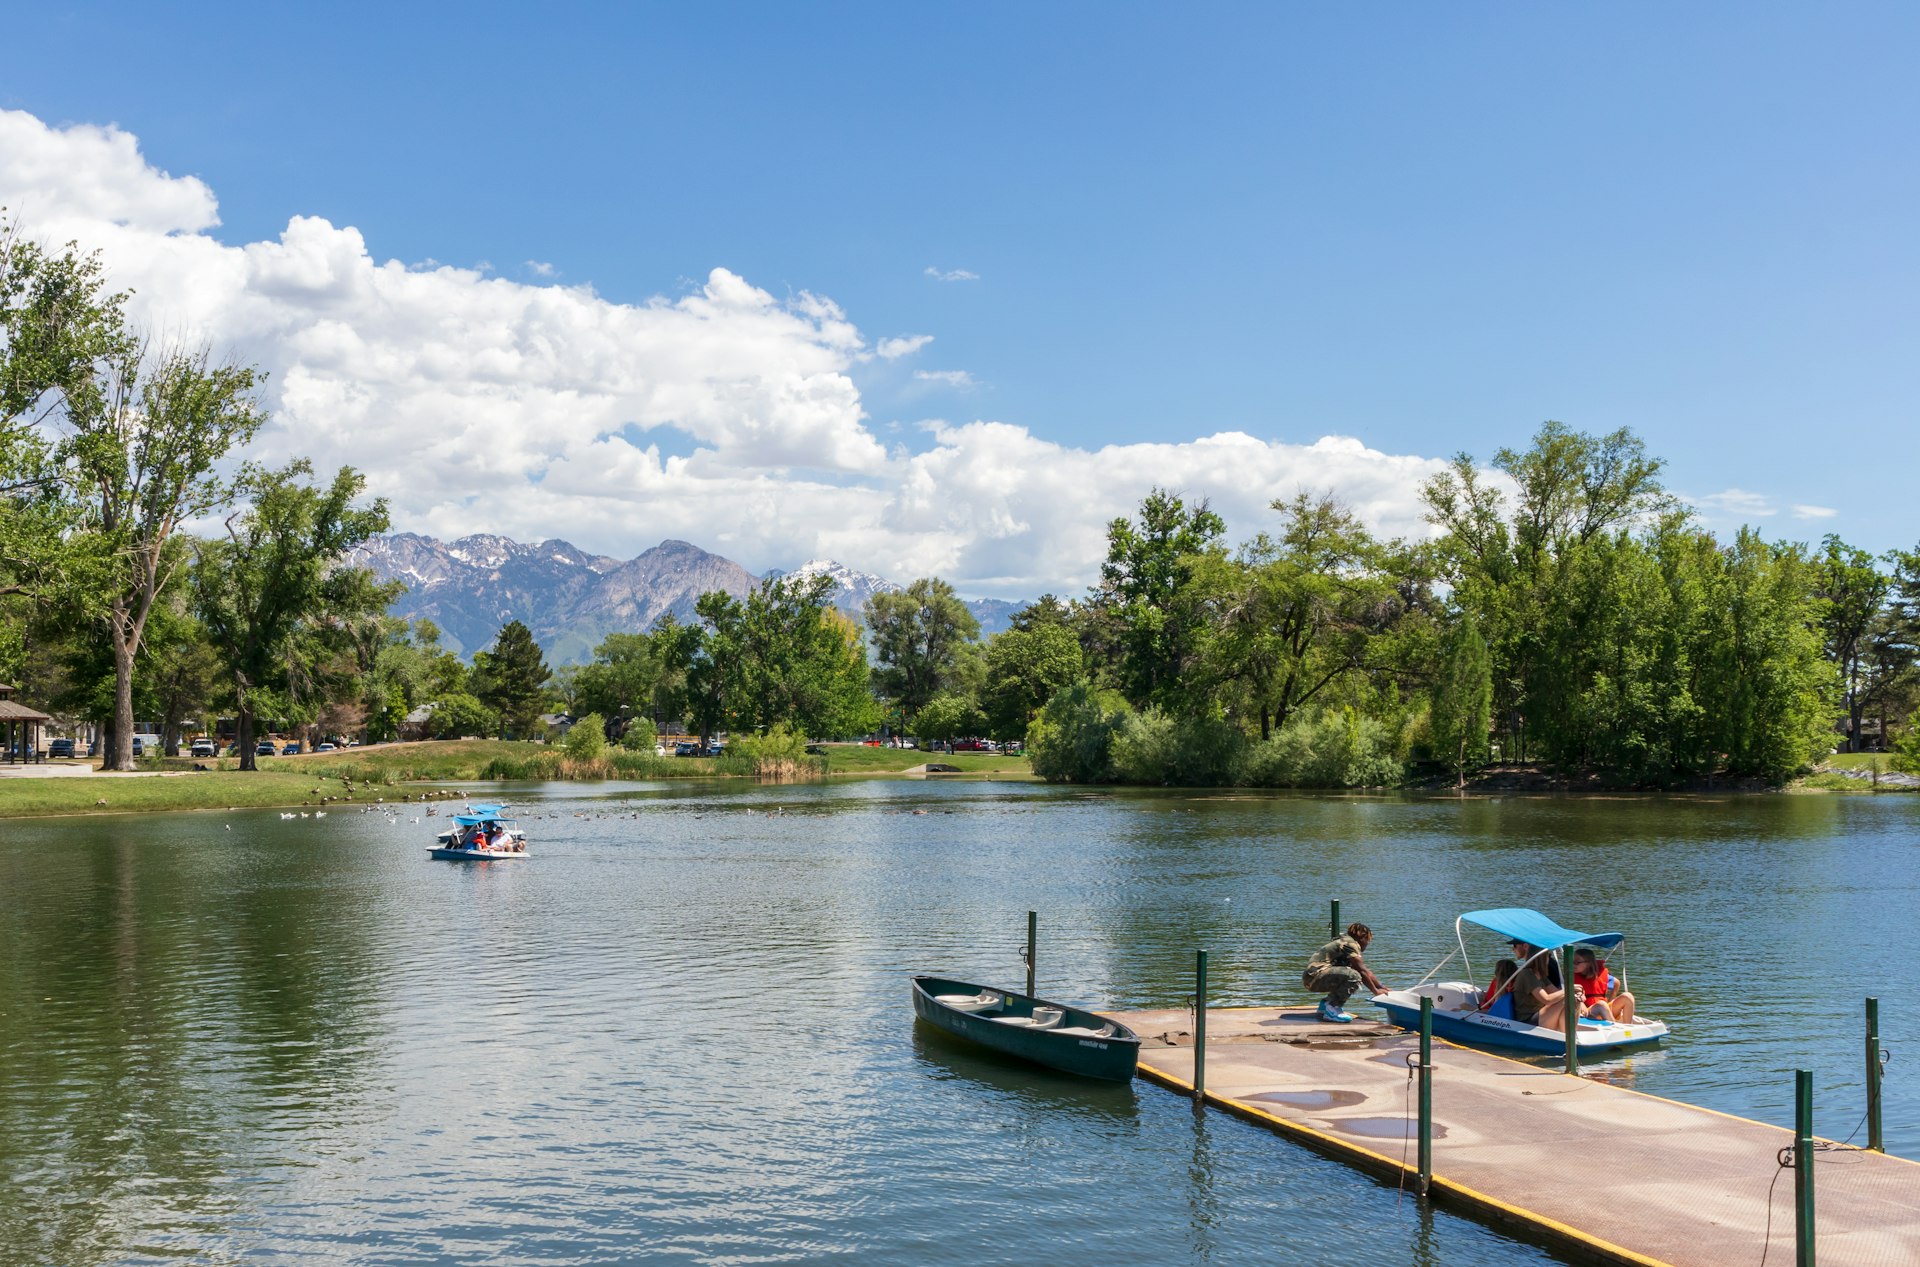 People on pedal boats at Liberty Park in Salt Lake City